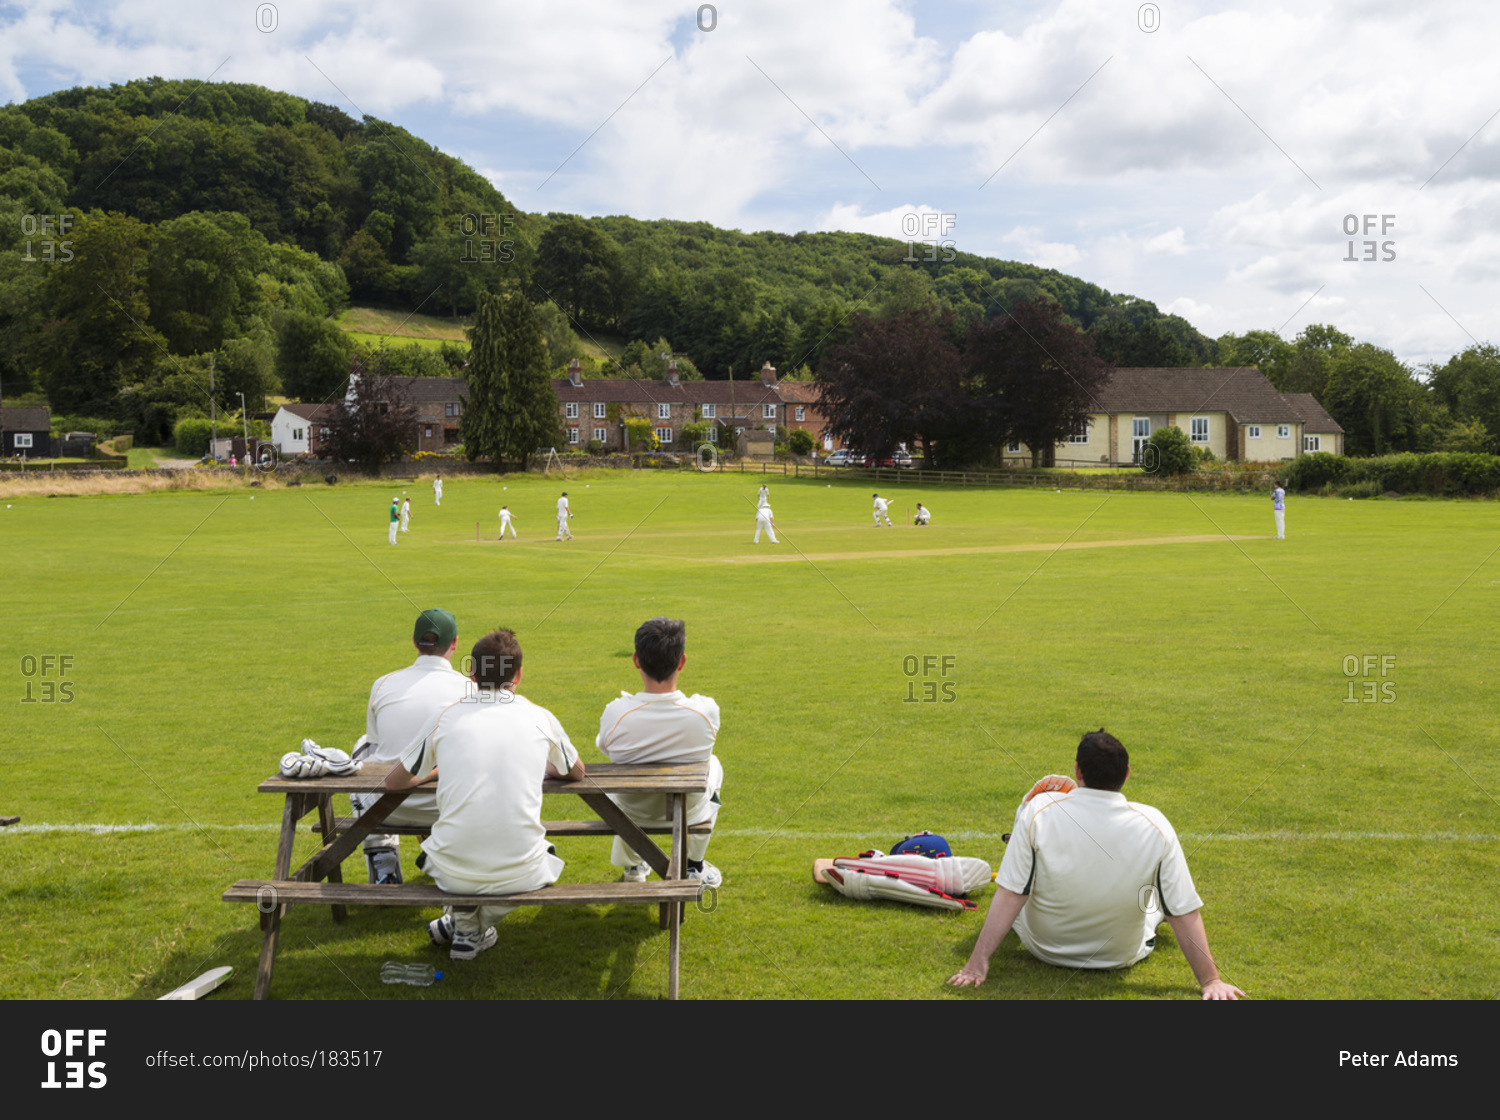 Players watching cricket match from picnic table